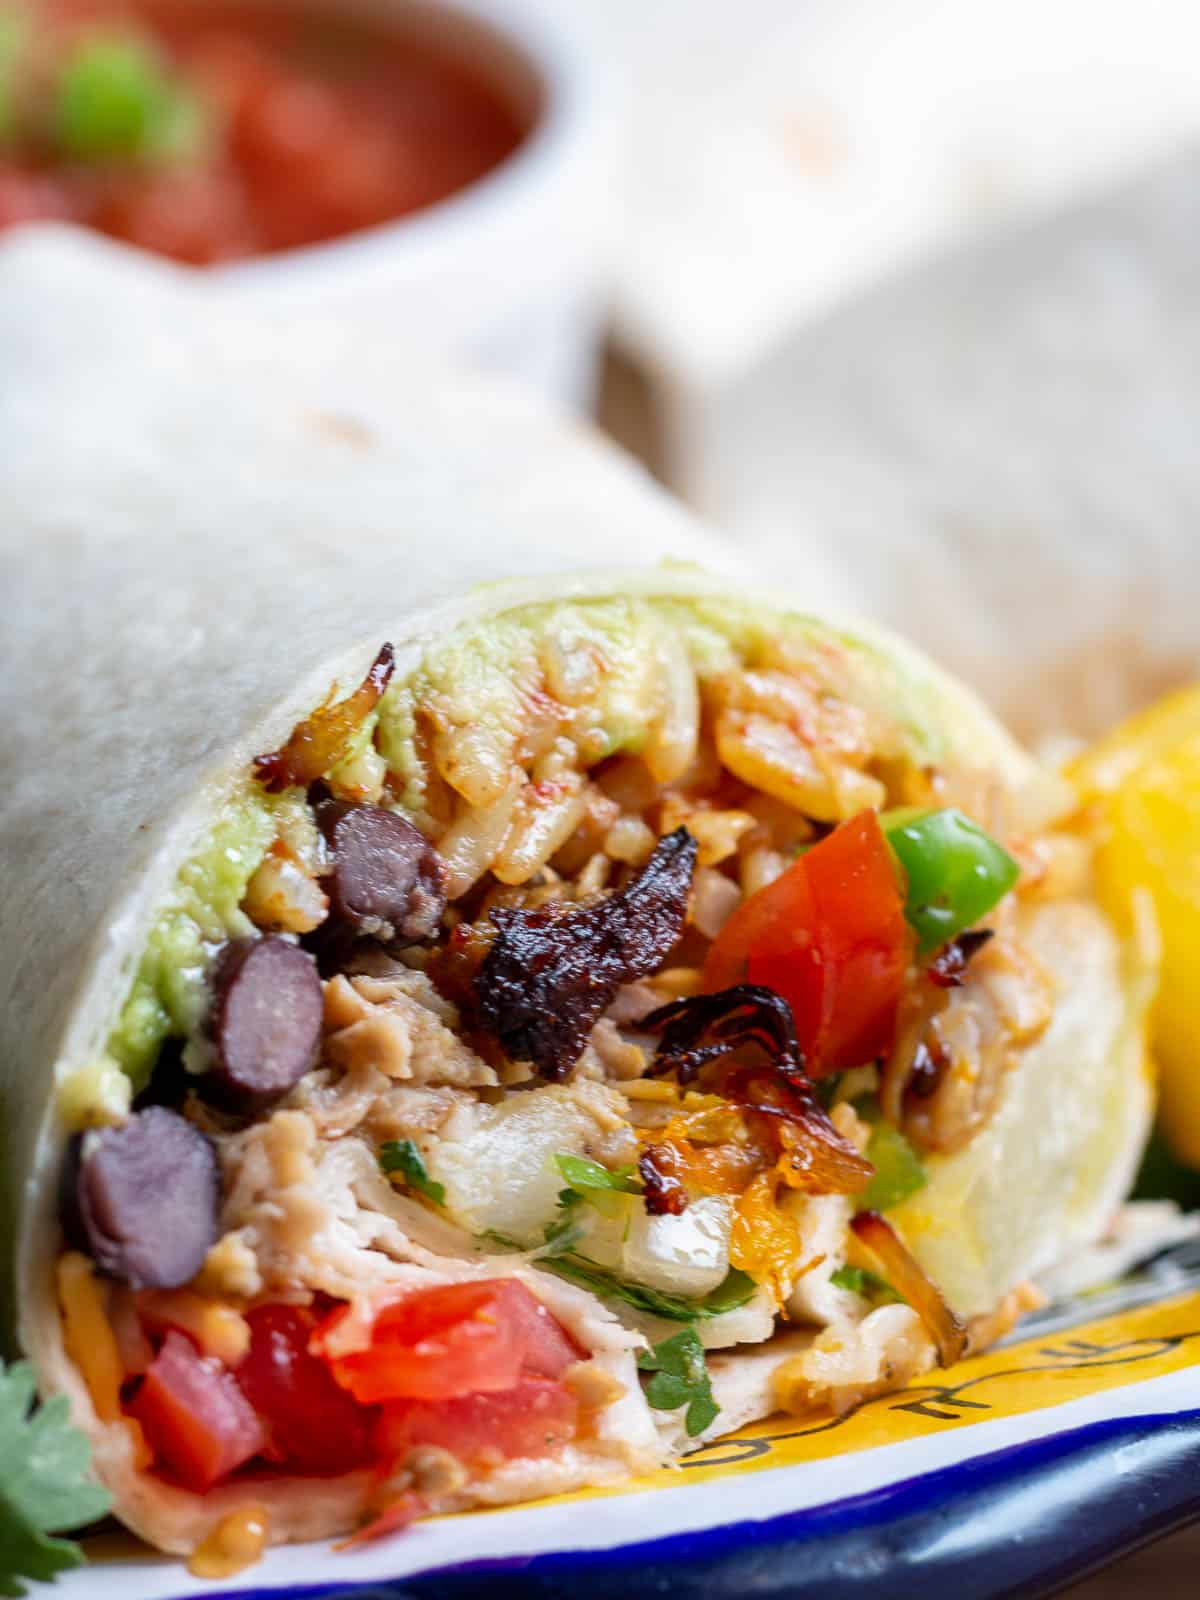 Close up of a wrapped carnitas burrito with all the toppings cut in half to show all the fillings like black beans, guacamole and pineapple slaw.